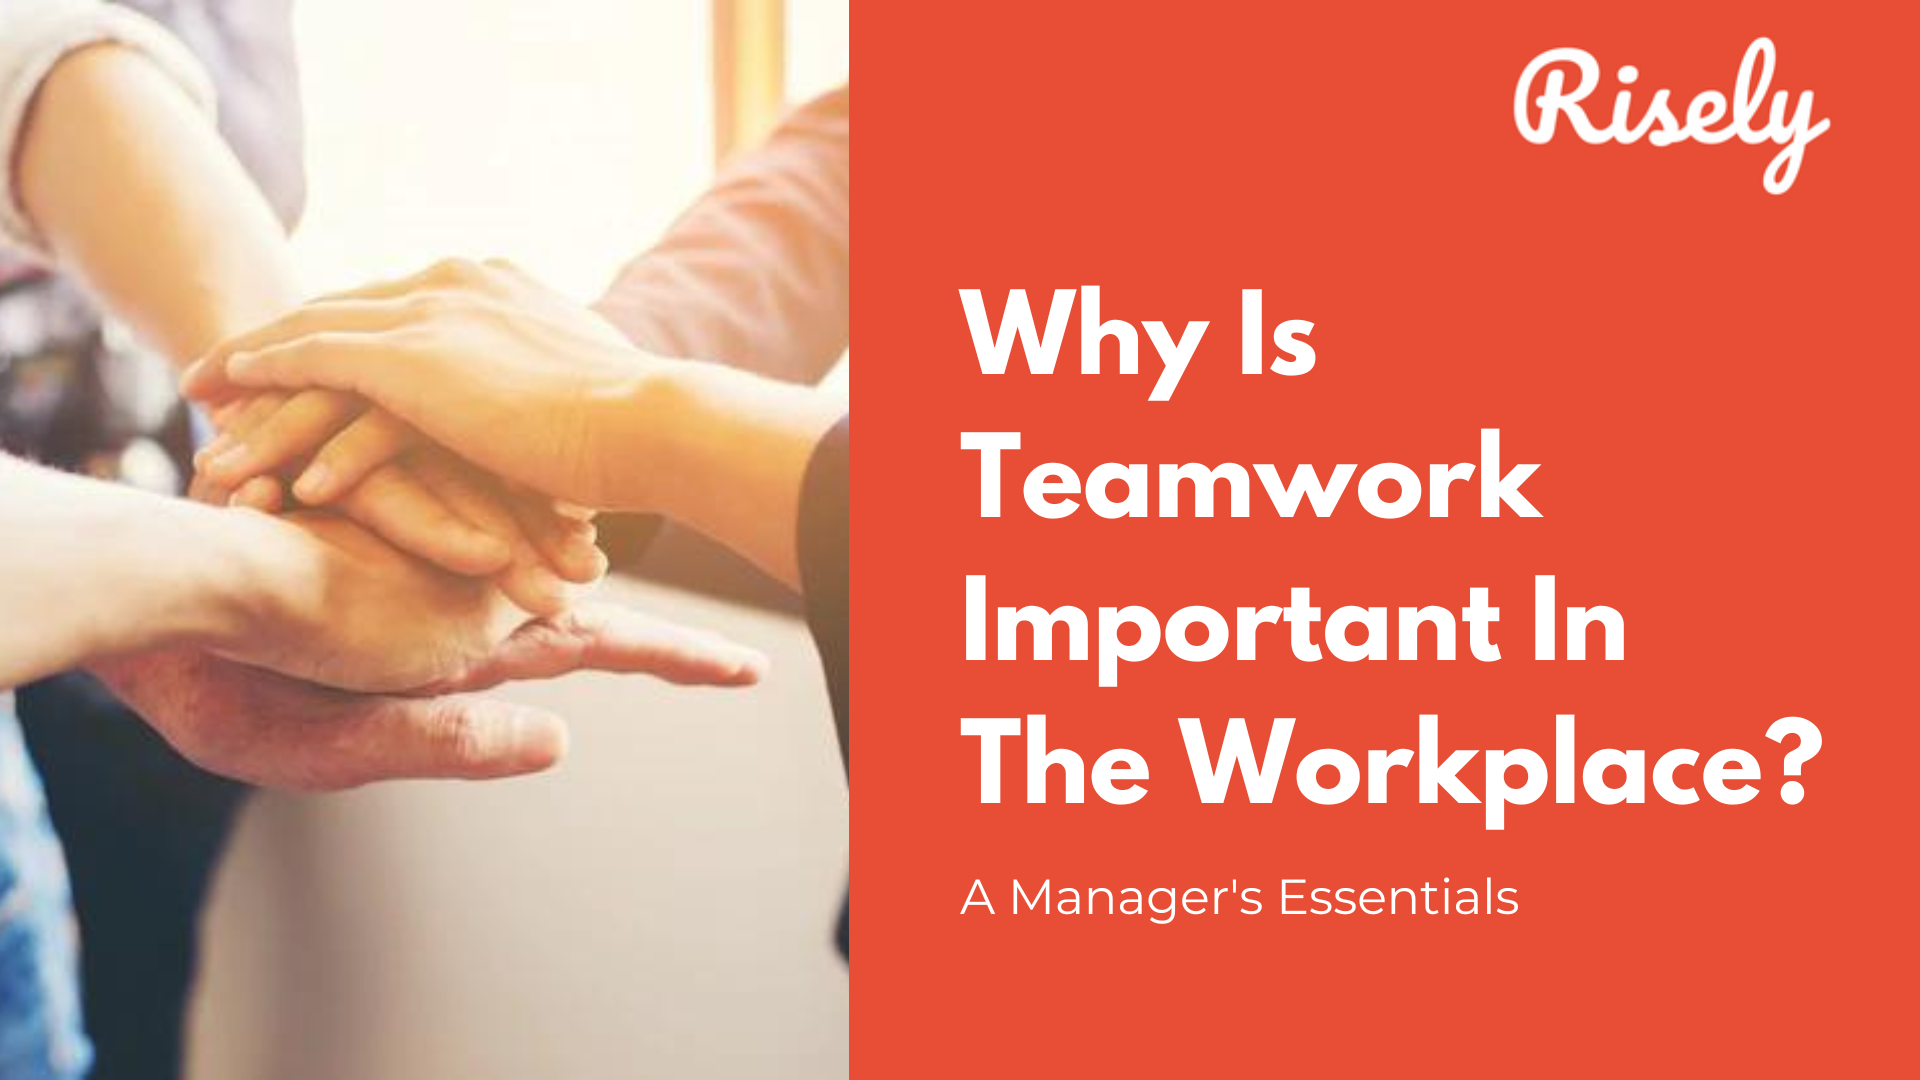 Why Is Teamwork Important In The Workplace? A Manager’s Essentials 